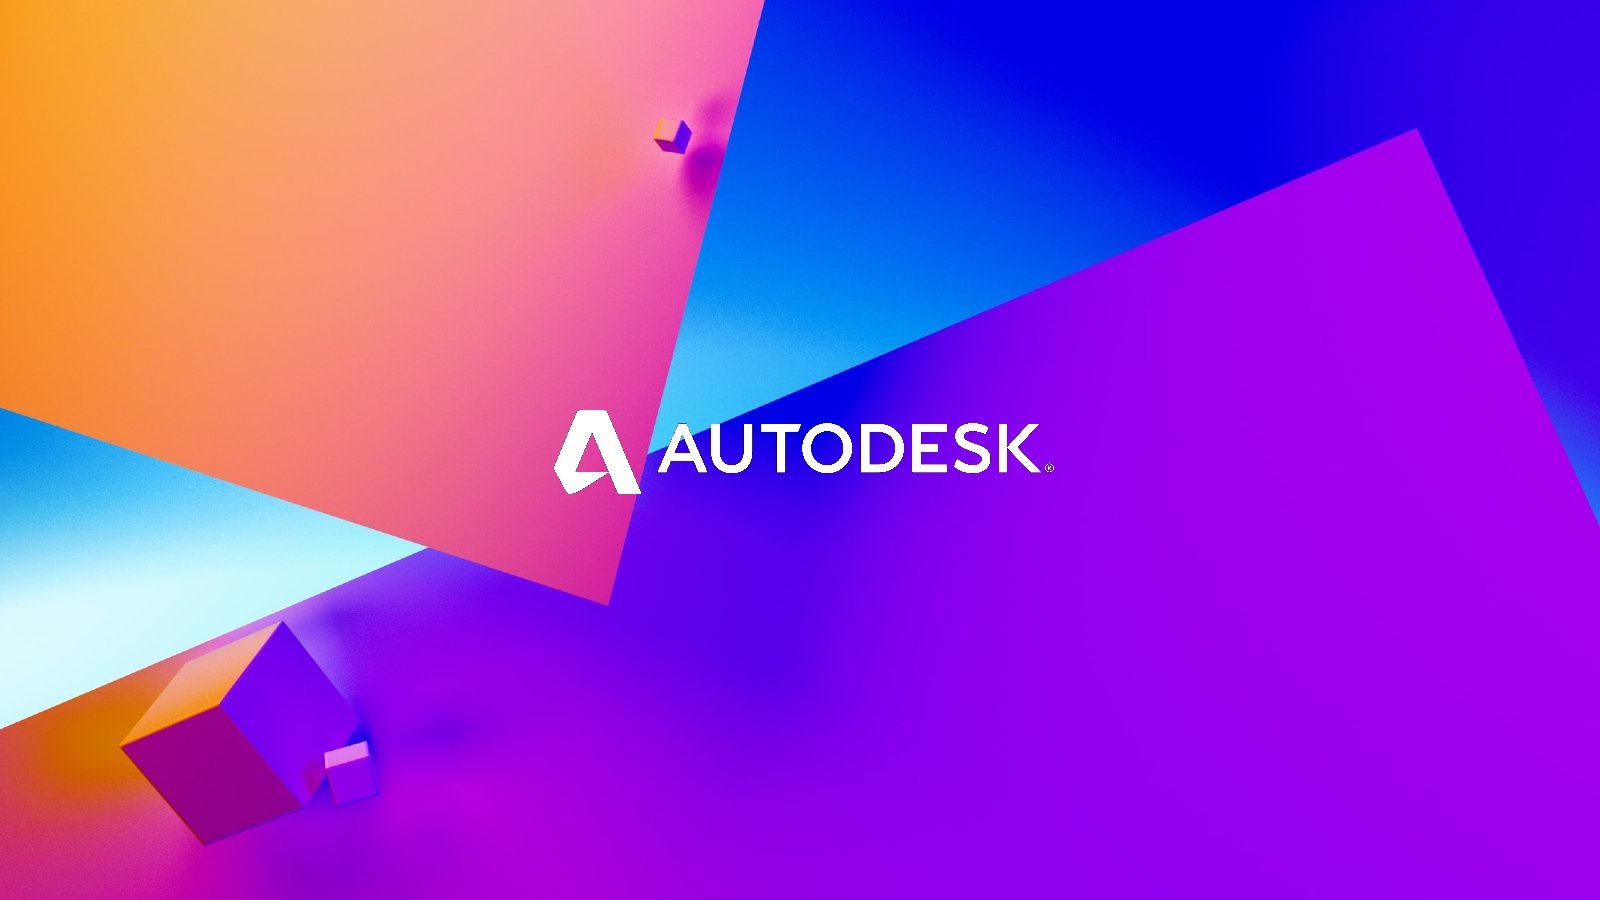 Autodesk reveals it was targeted by Russian SolarWinds hackers